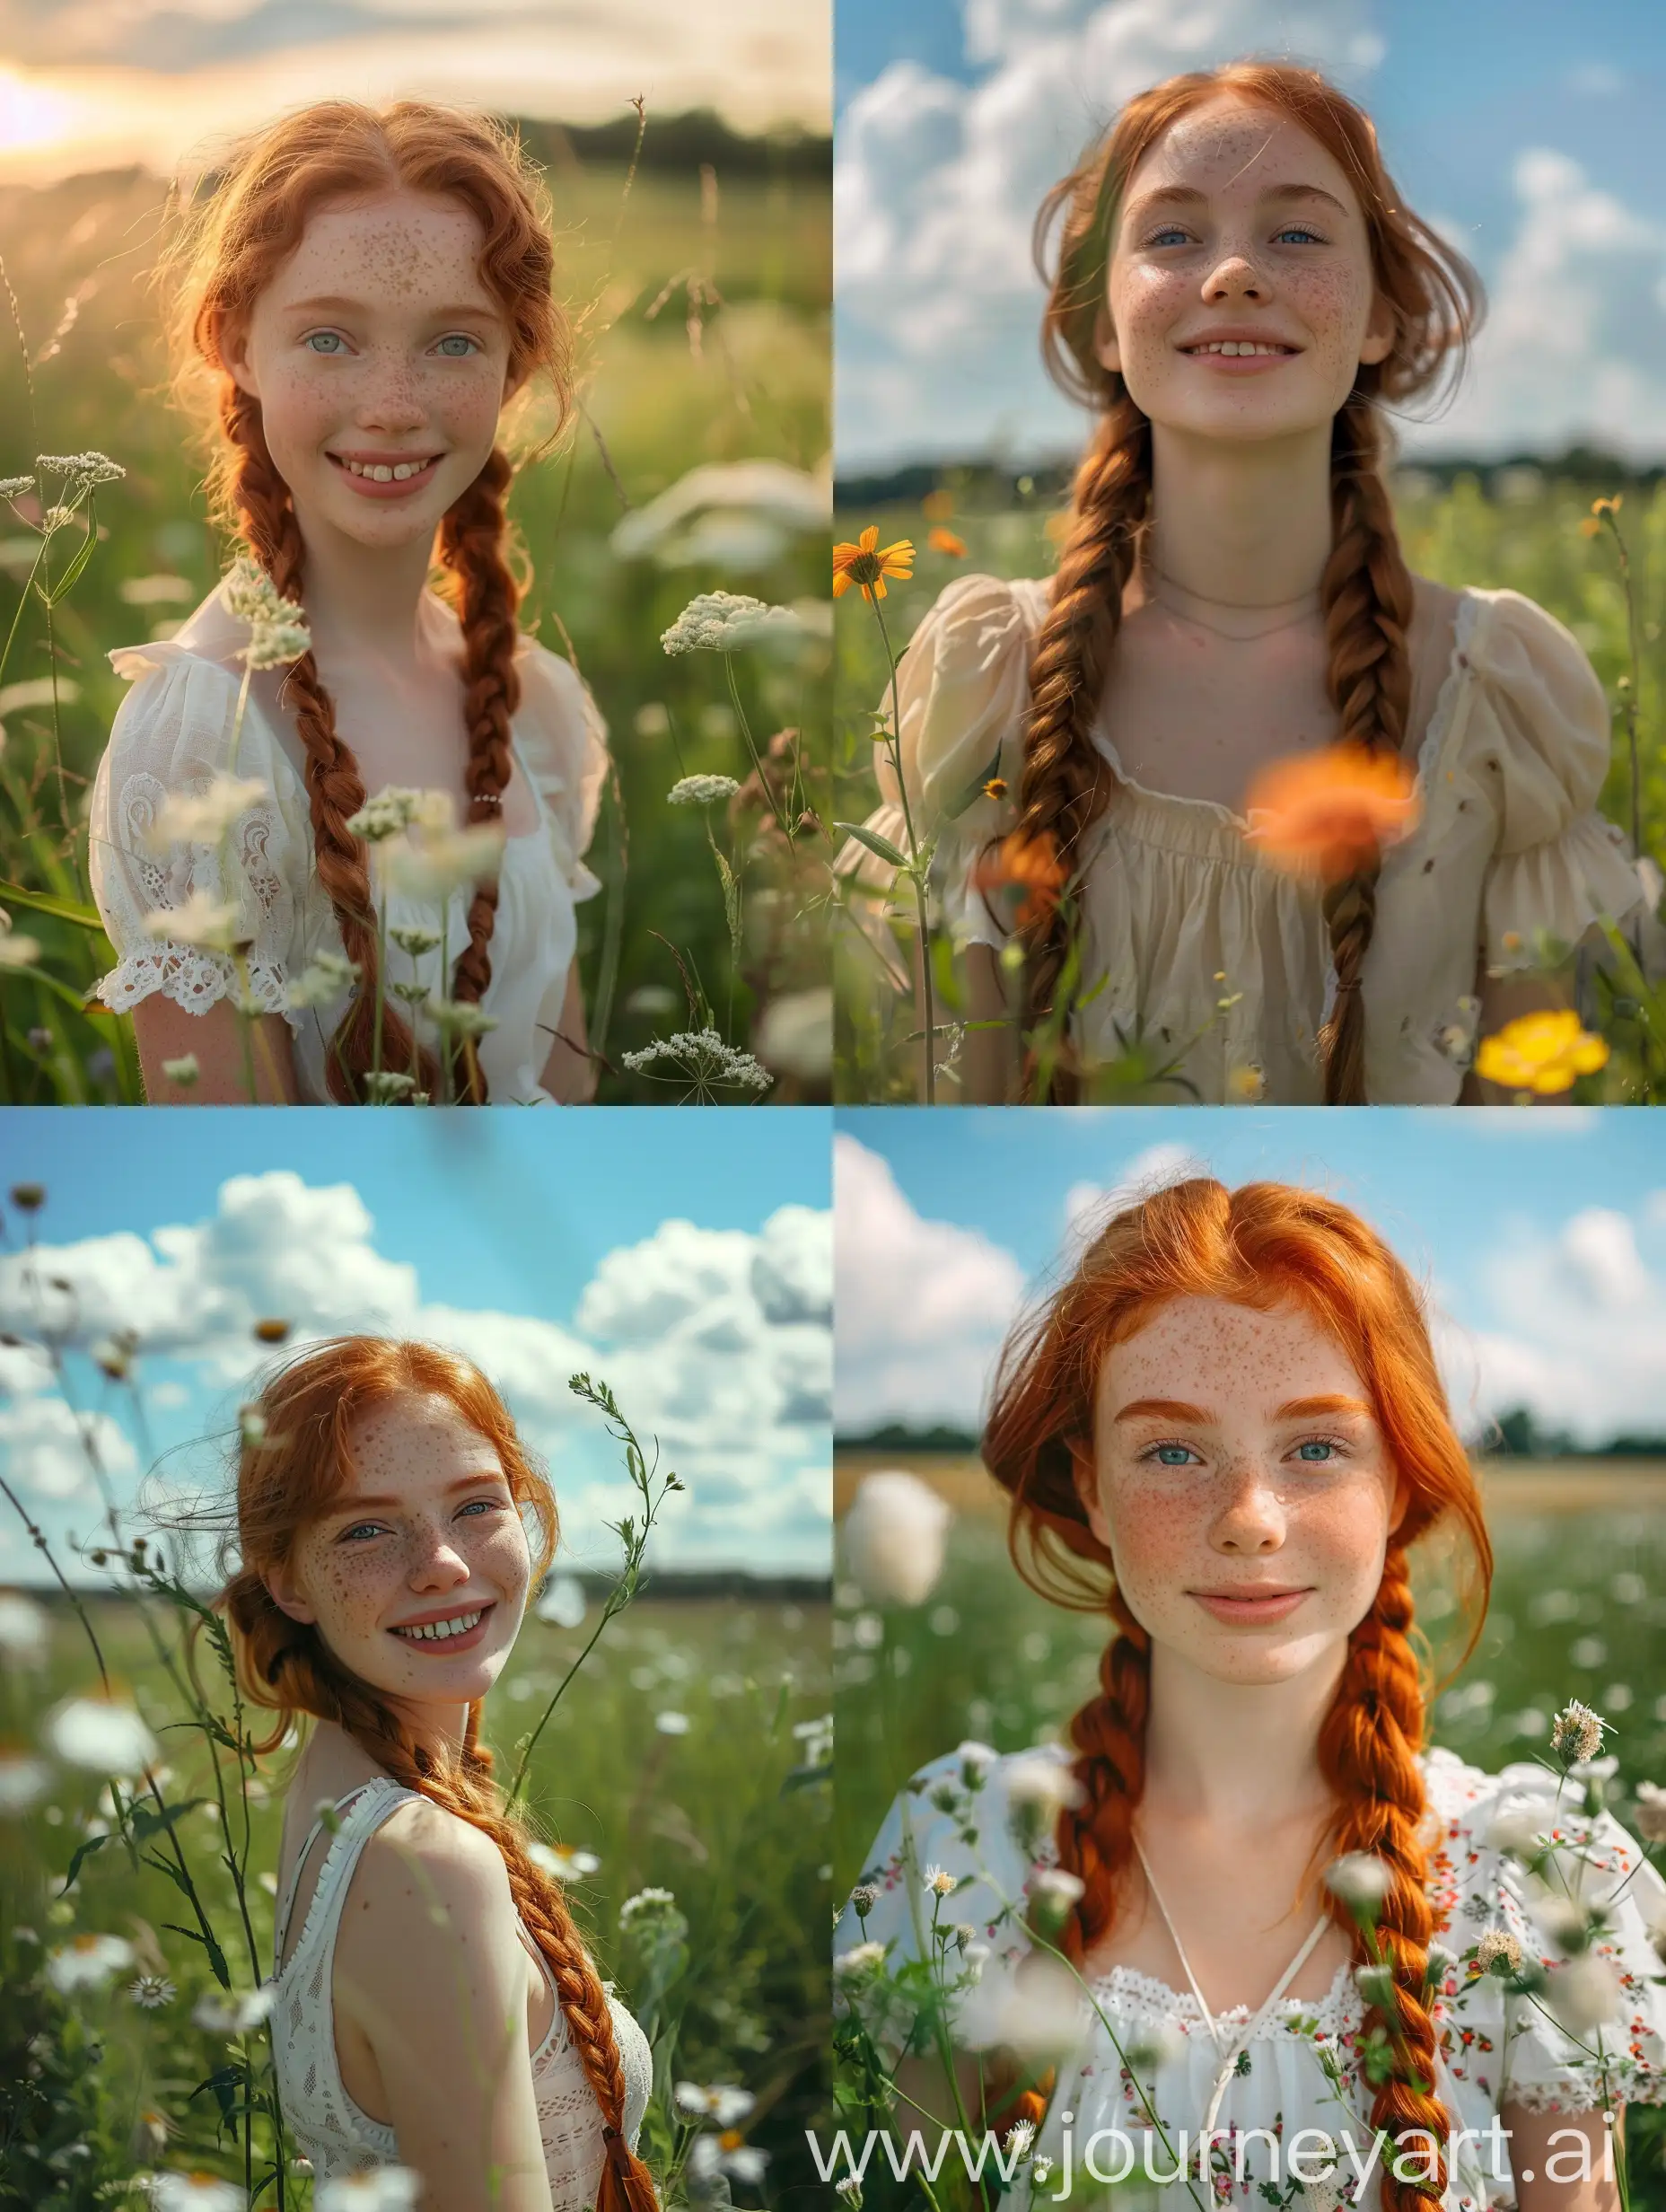 Smiling-RedHaired-Girl-with-Braids-in-Sunny-Flower-Field